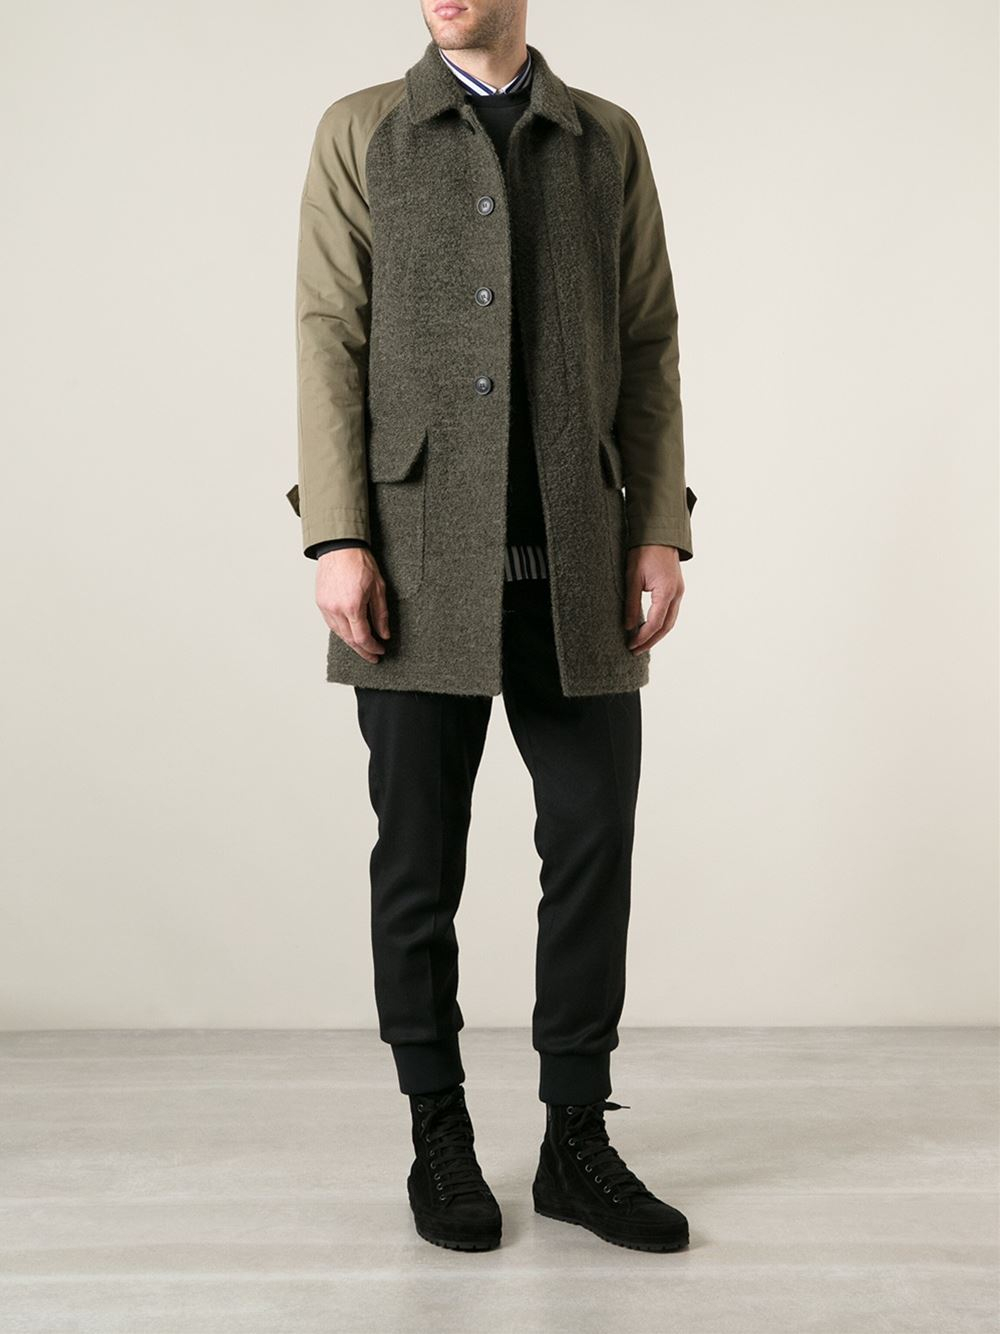 Lyst - Mauro Grifoni Military Style Panelled Coat in Green for Men